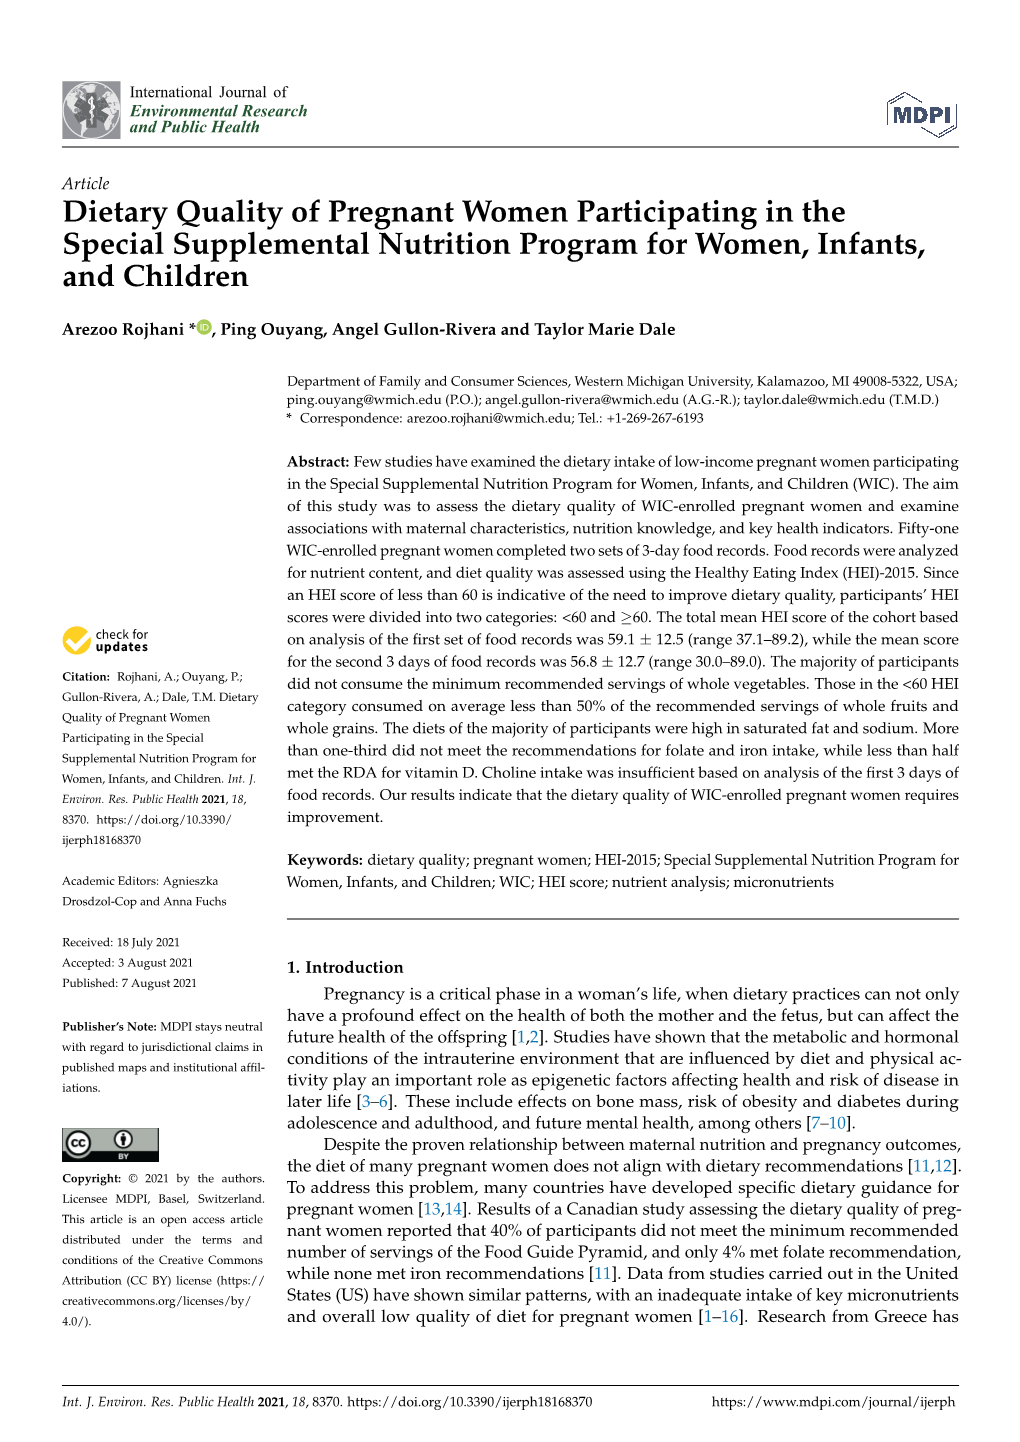 Dietary Quality of Pregnant Women Participating in the Special Supplemental Nutrition Program for Women, Infants, and Children